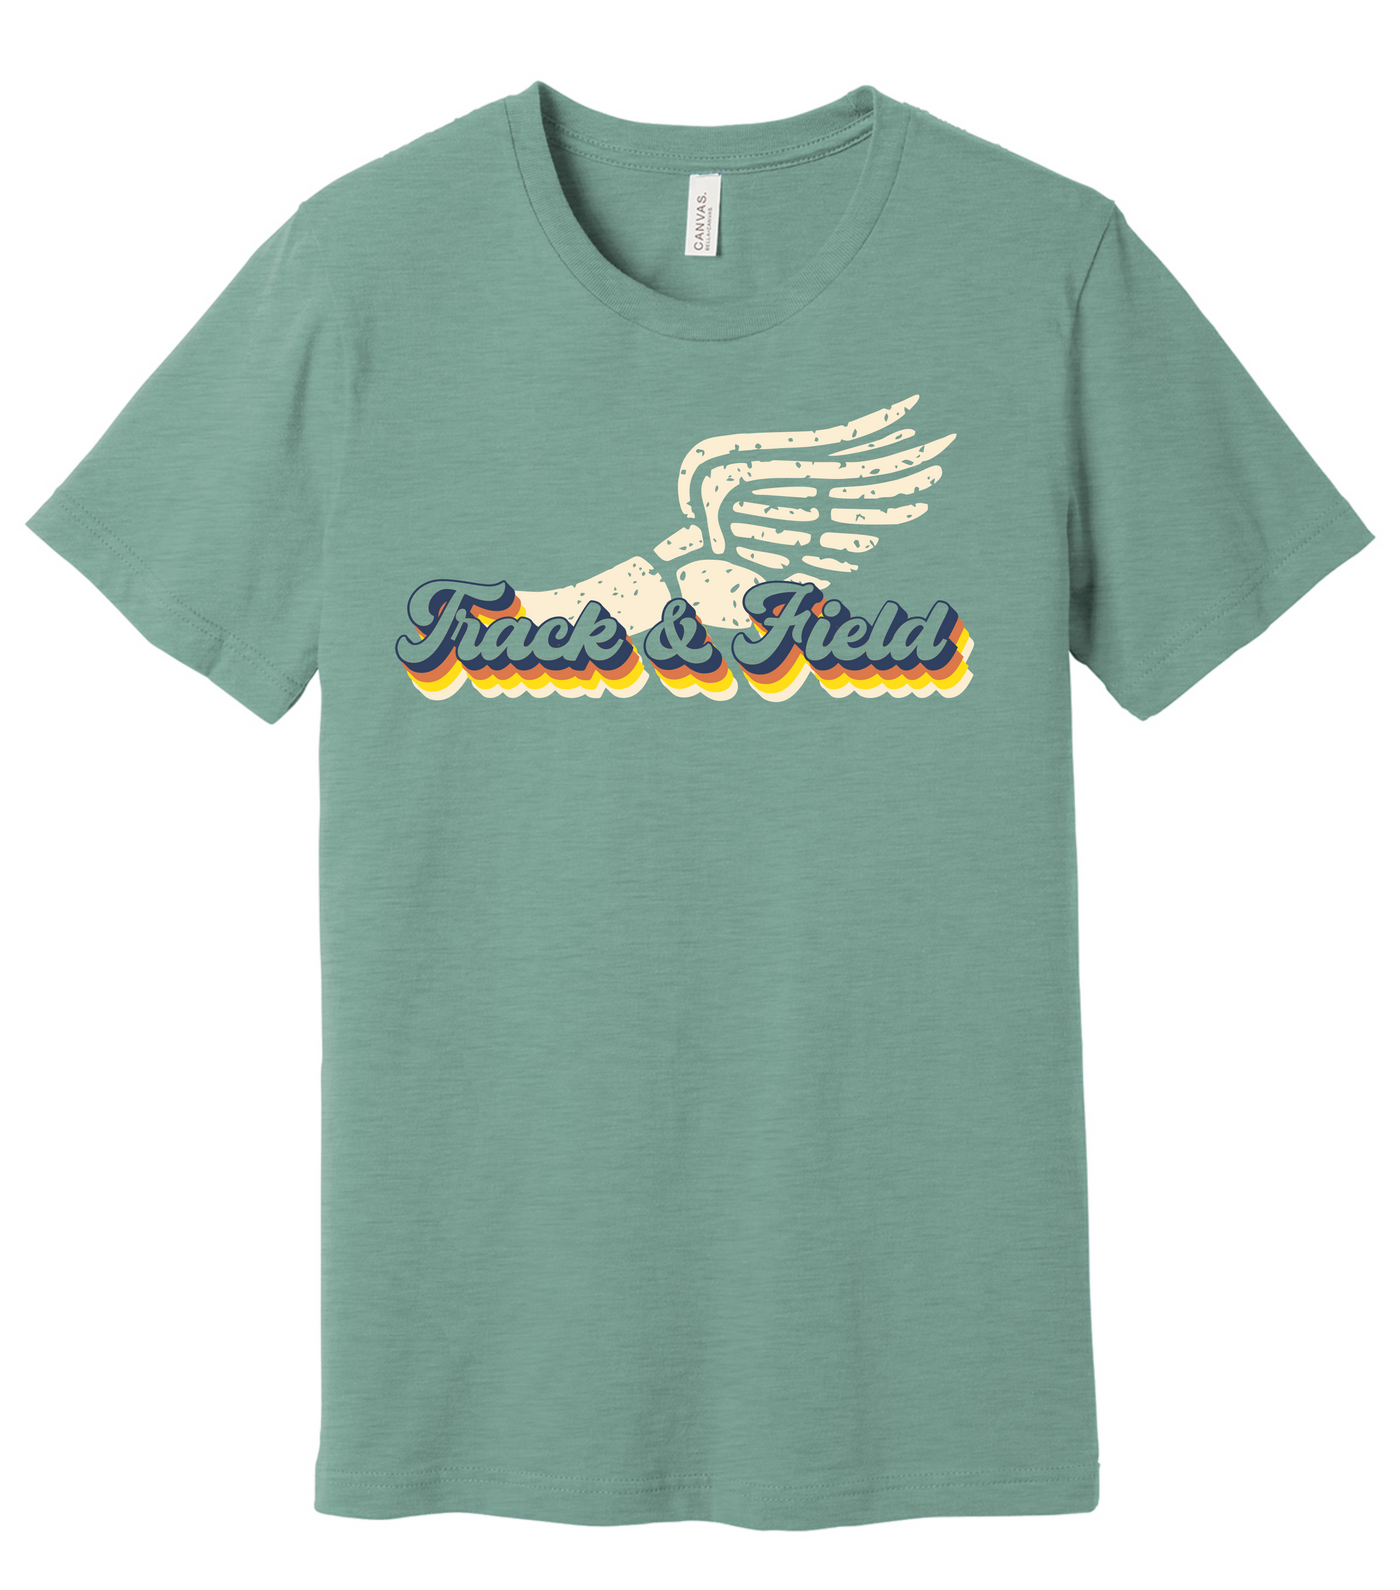 Retro Track and Field Short Sleeve Graphic T-shirt